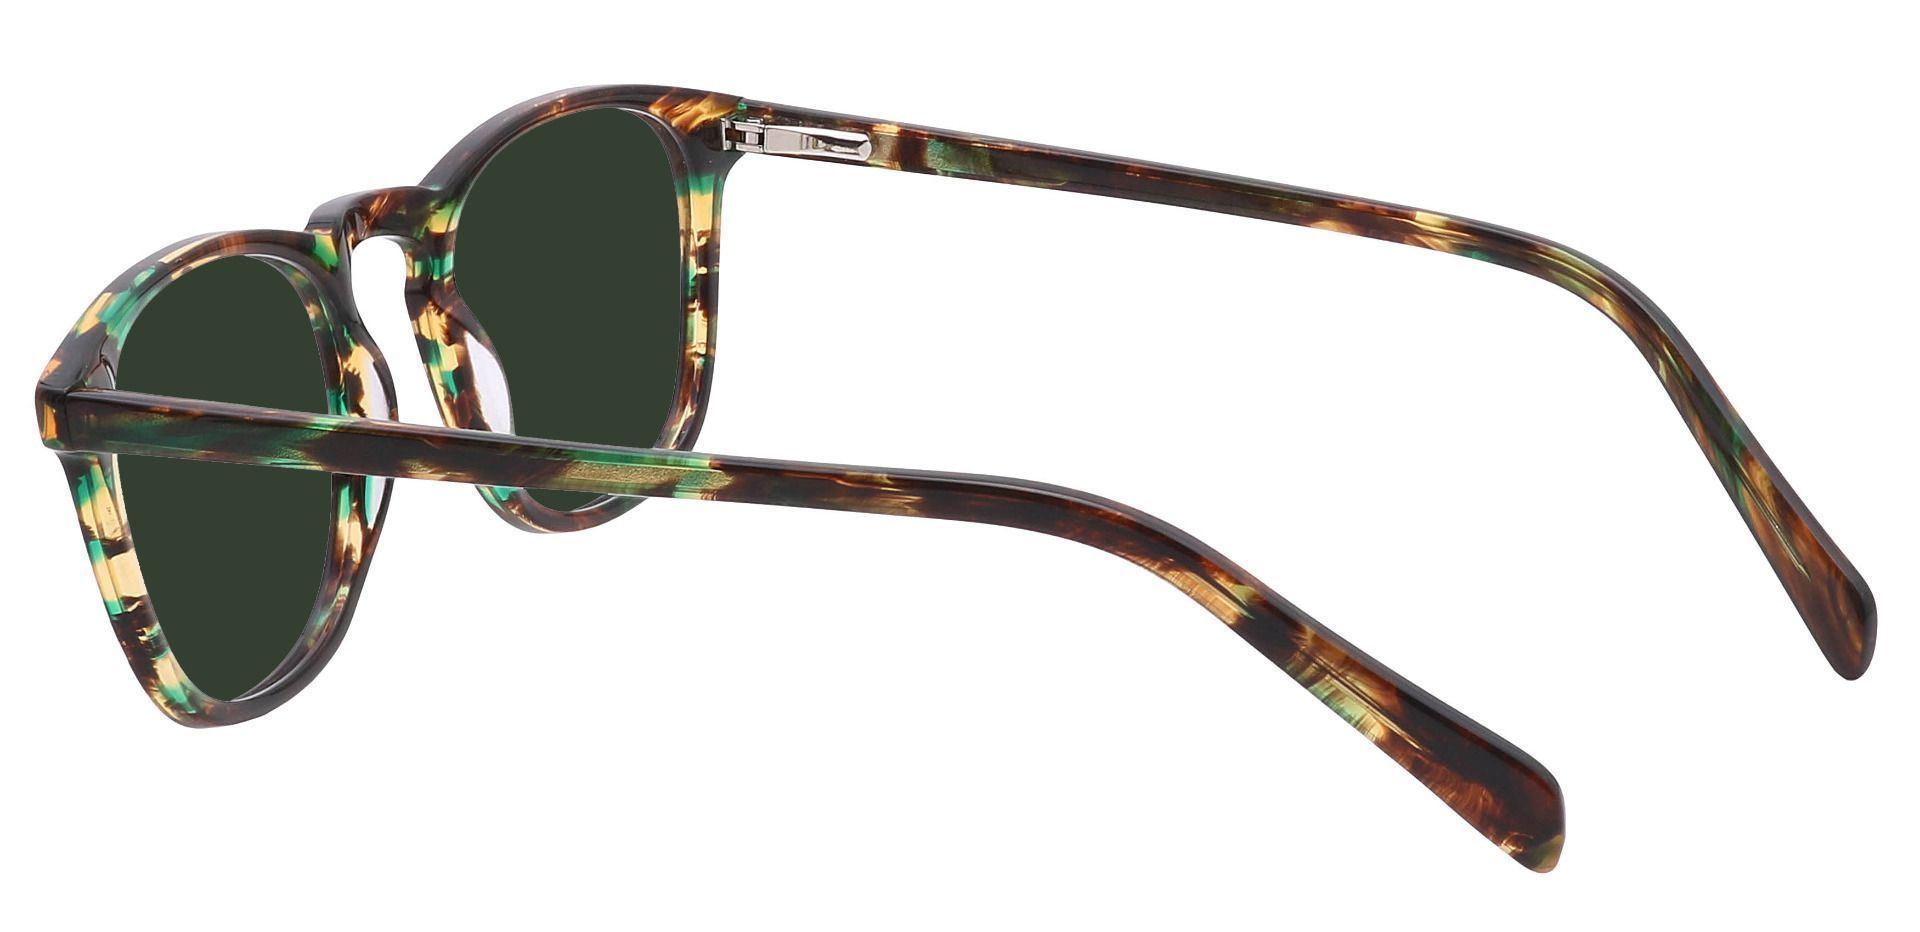 Venti Square Lined Bifocal Sunglasses - Green Frame With Green Lenses